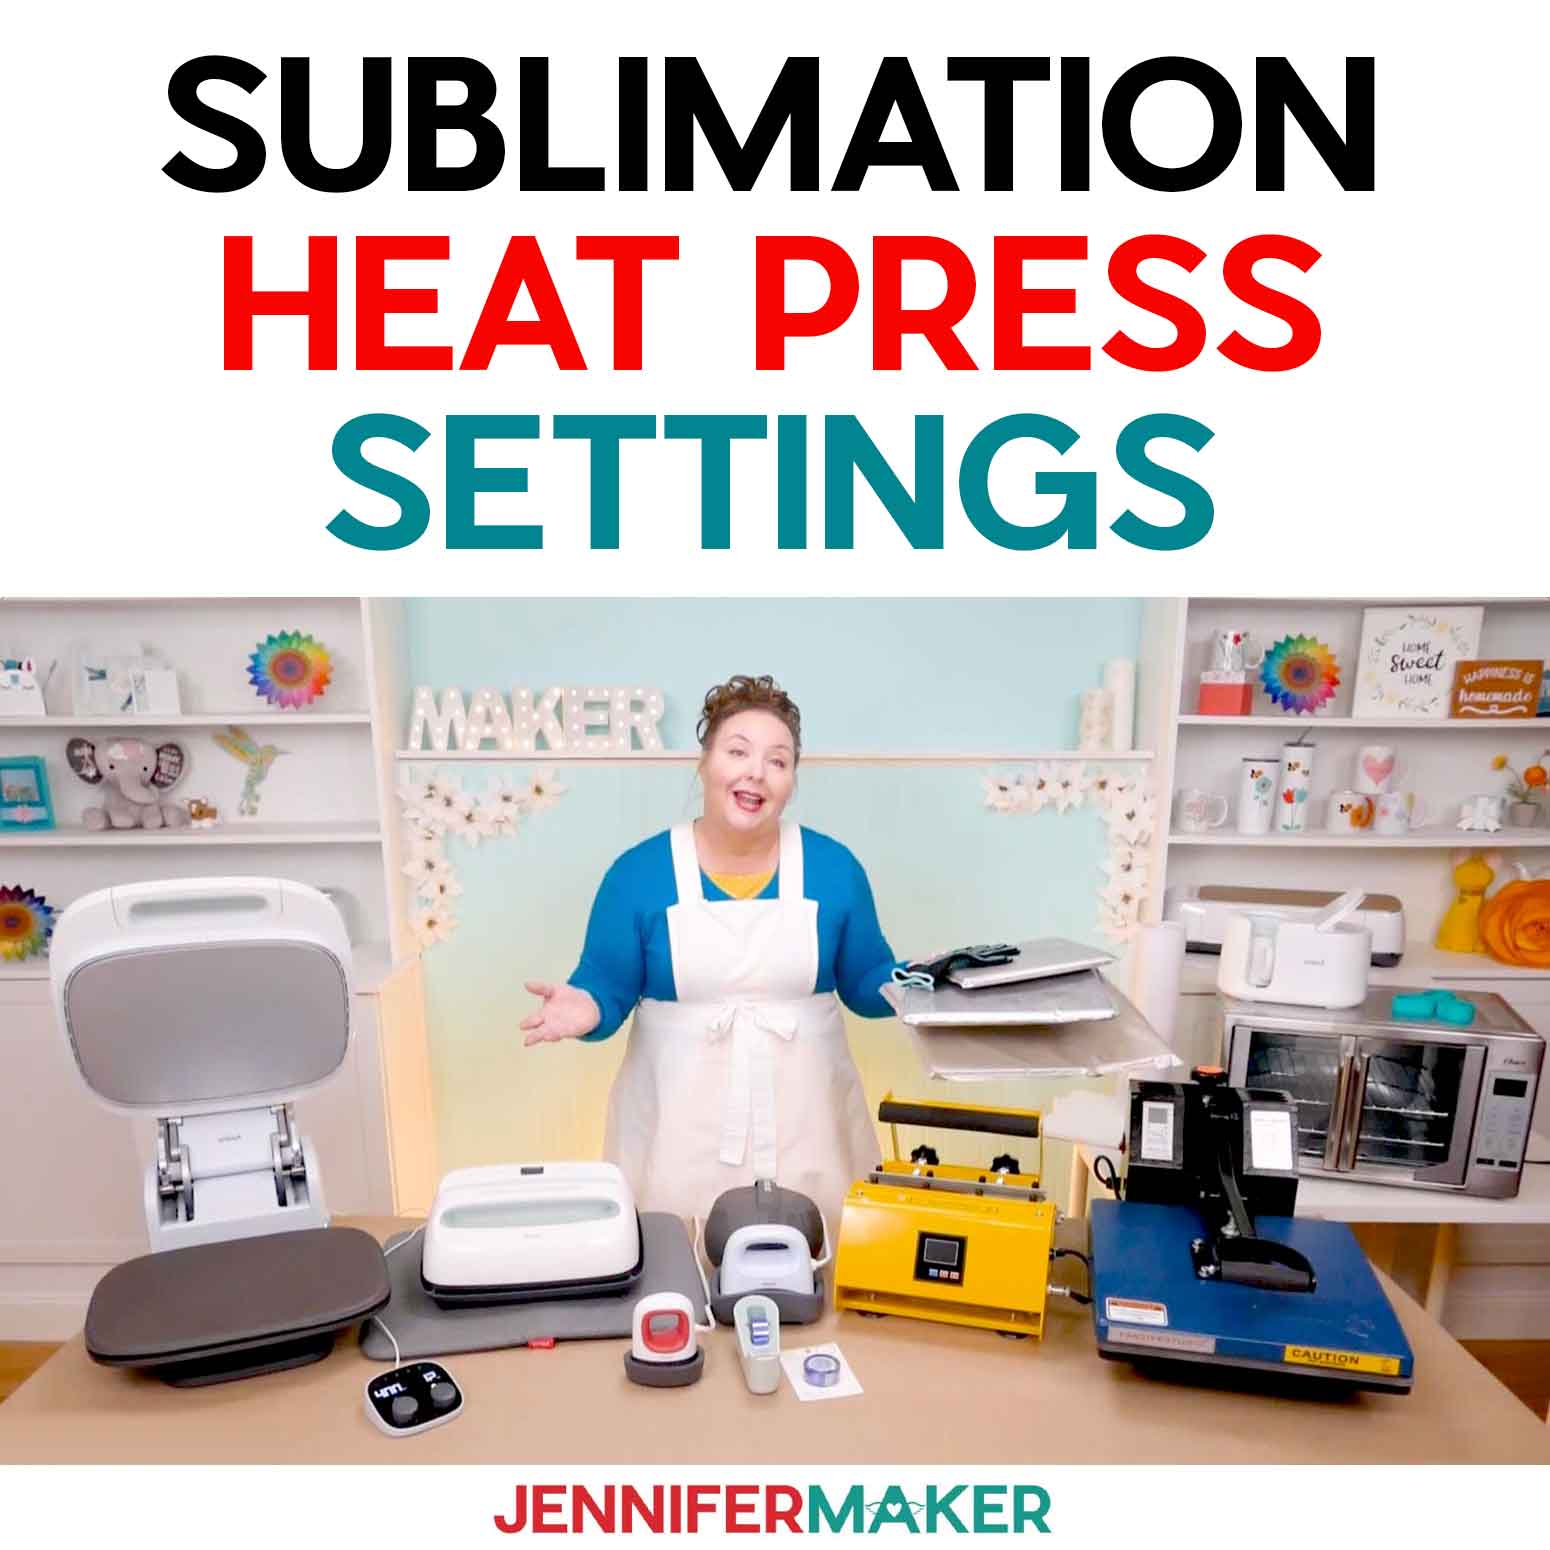 Sublimation Heat Press Settings Guide with Times, Temperatures, and Pressures